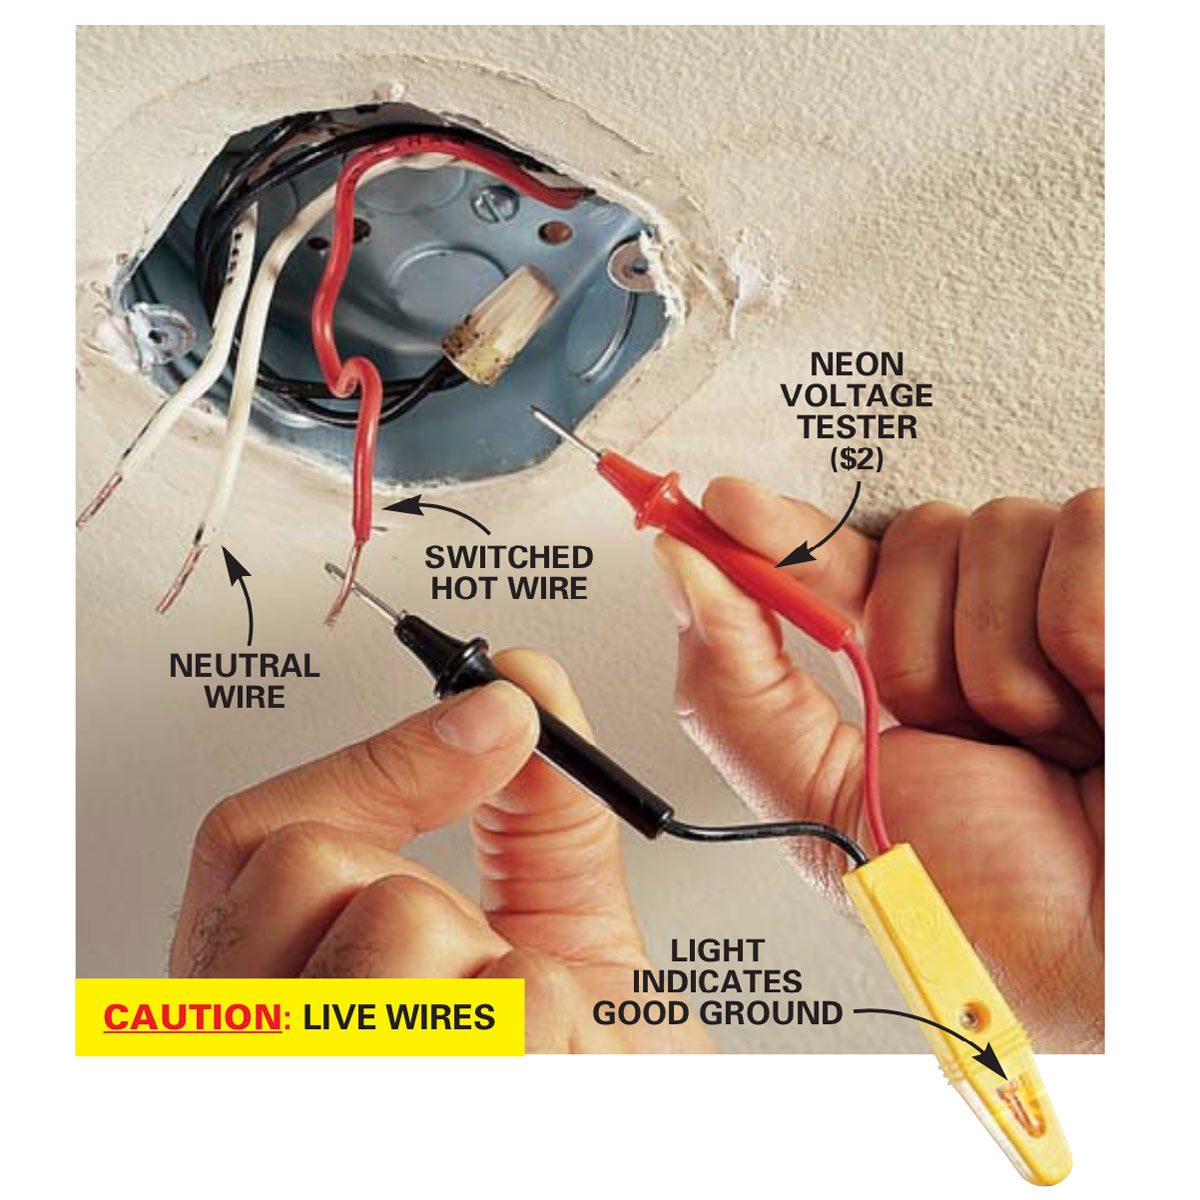 Albums 91+ Images how to test a ceiling light with a multimeter Sharp